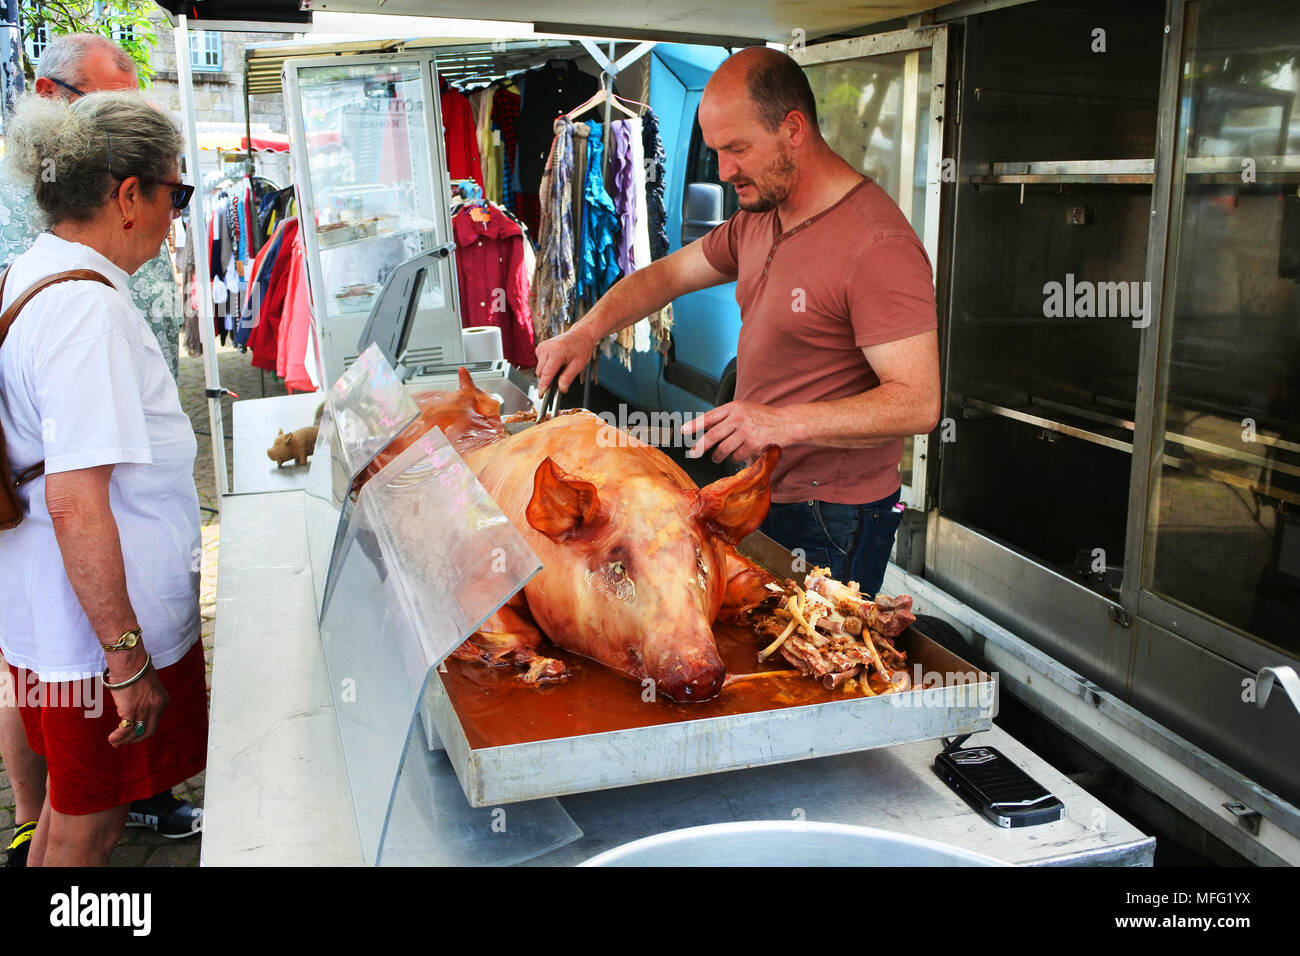 Whole roasted pig being carved at a French market, Huelgoat, Brittany - John Gollop Stock Photo